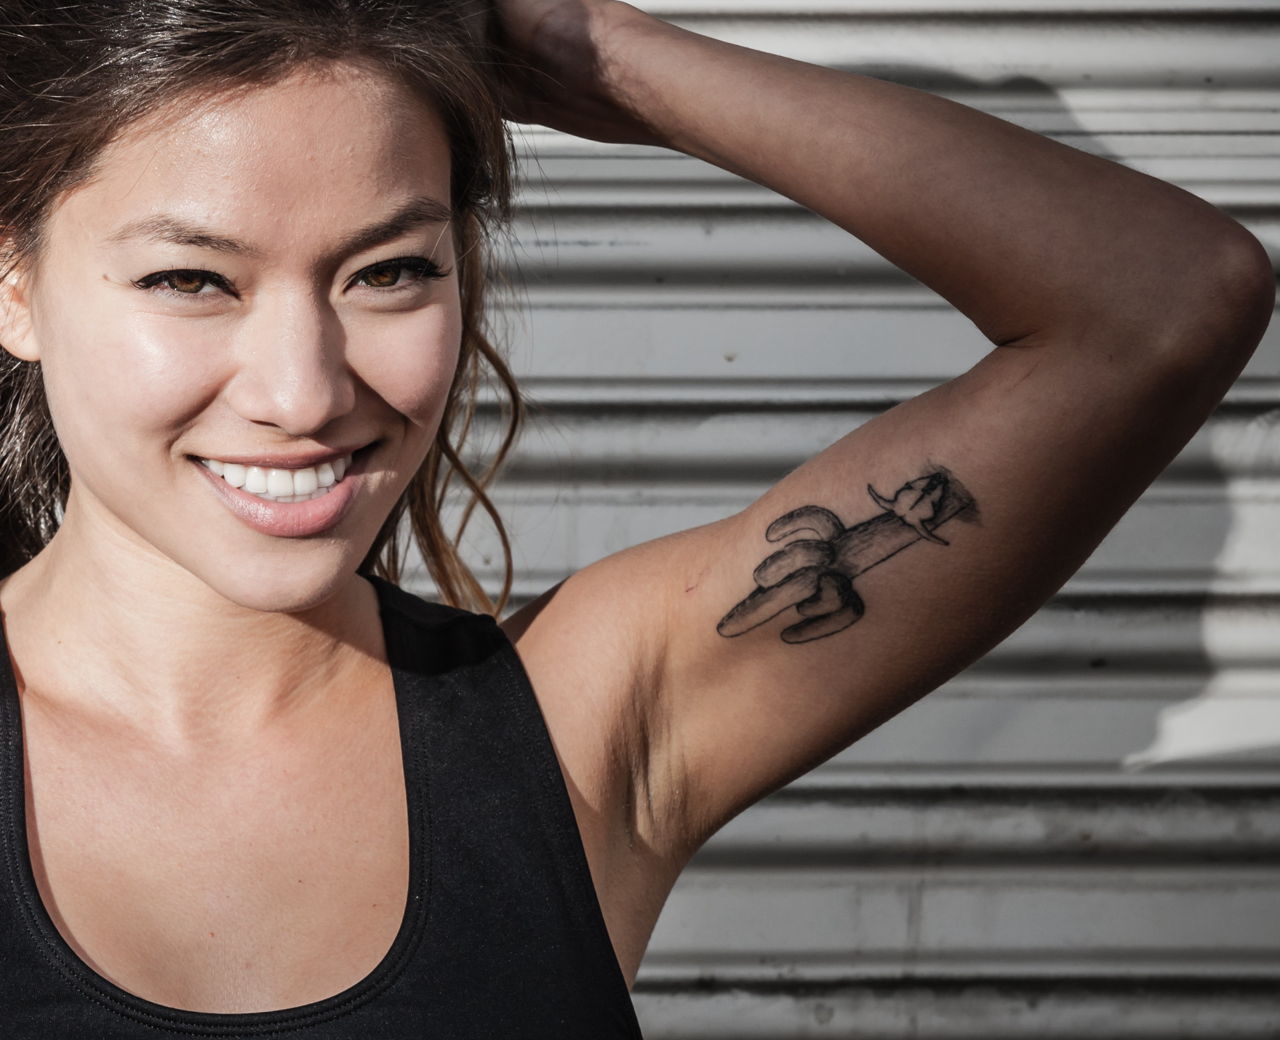 Surprising! What Men Really Think of Women With Tattoos - Thoughtful